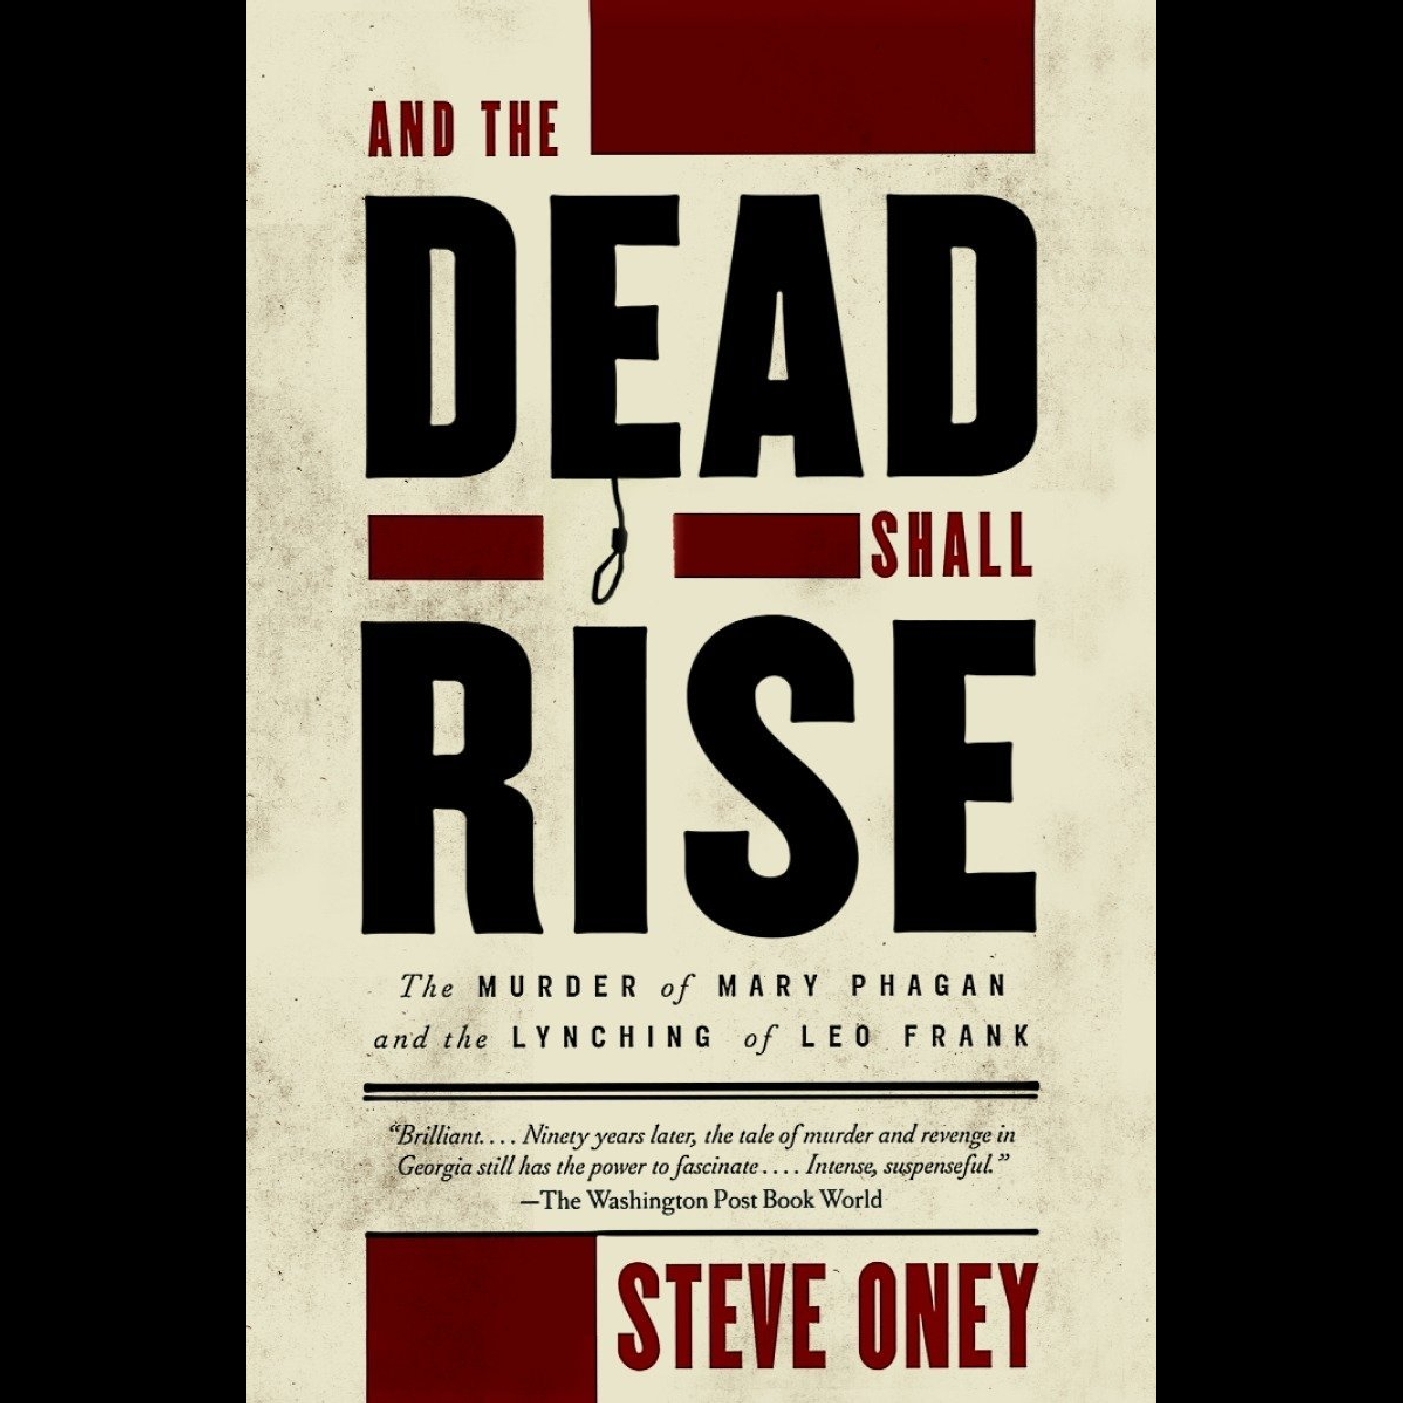 Leo Frank Murder Trial & Lynching #1 - Steve Oney, And the Dead Shall Rise